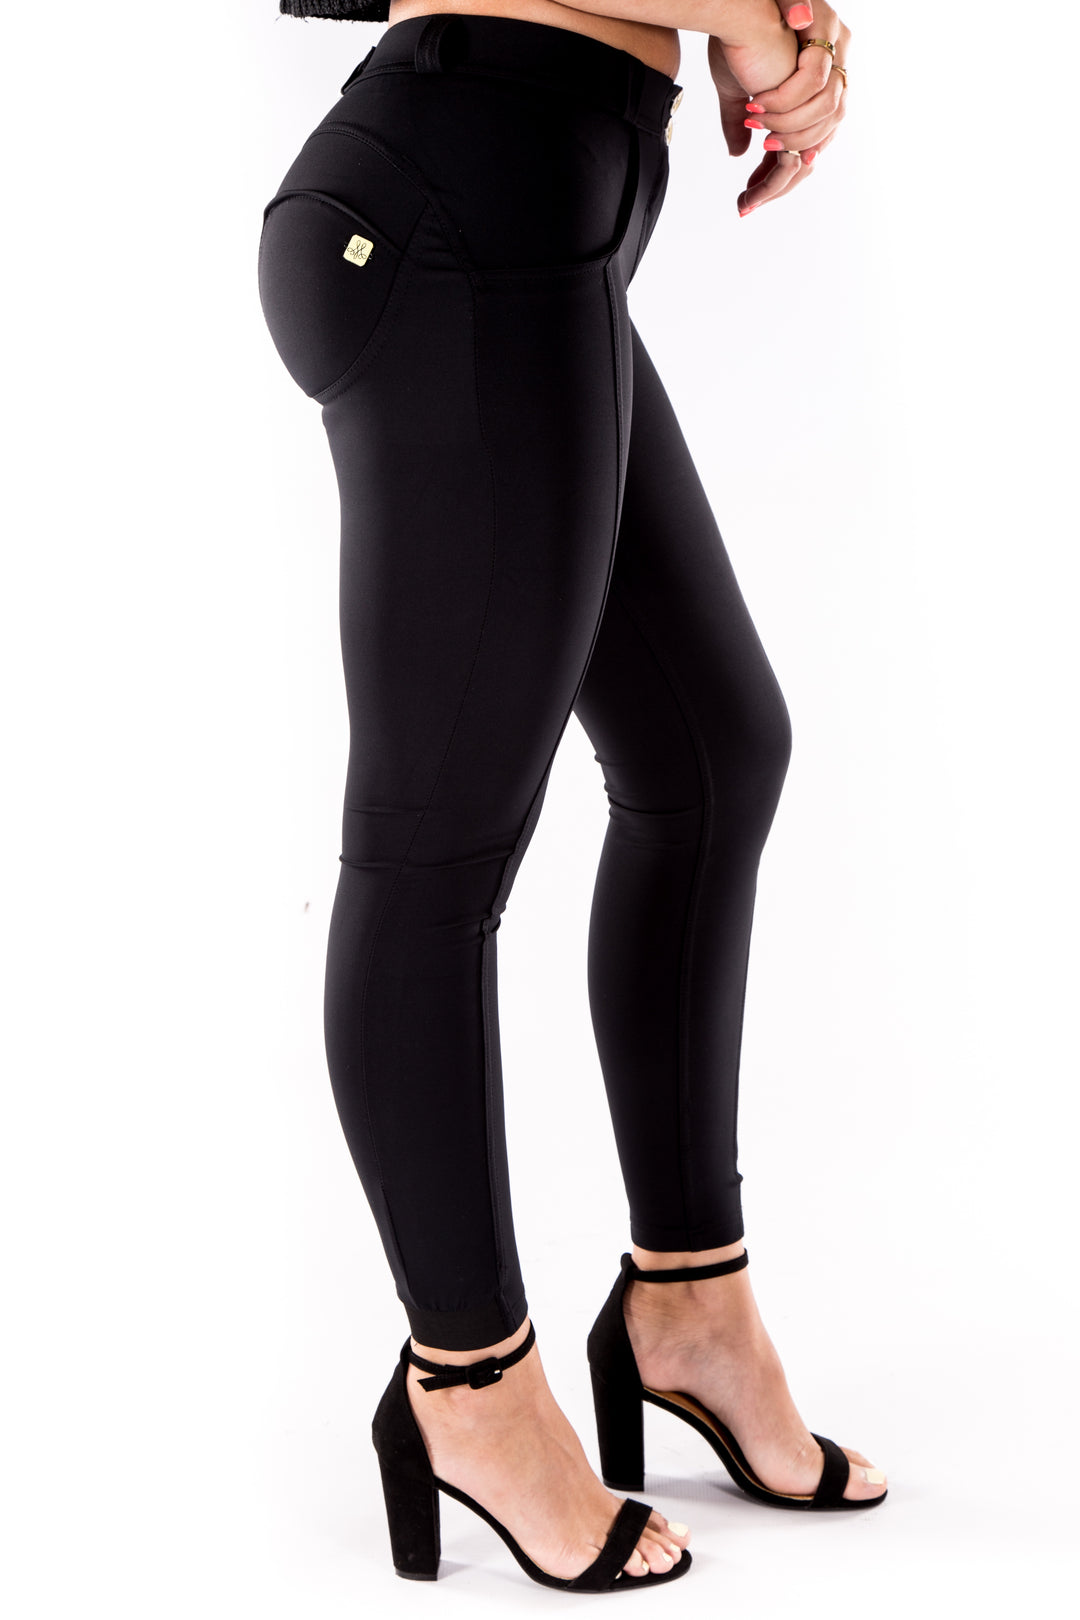 Low waist Hipster Butt lifting shaping leggings - Black spandexaos-init aos-animate